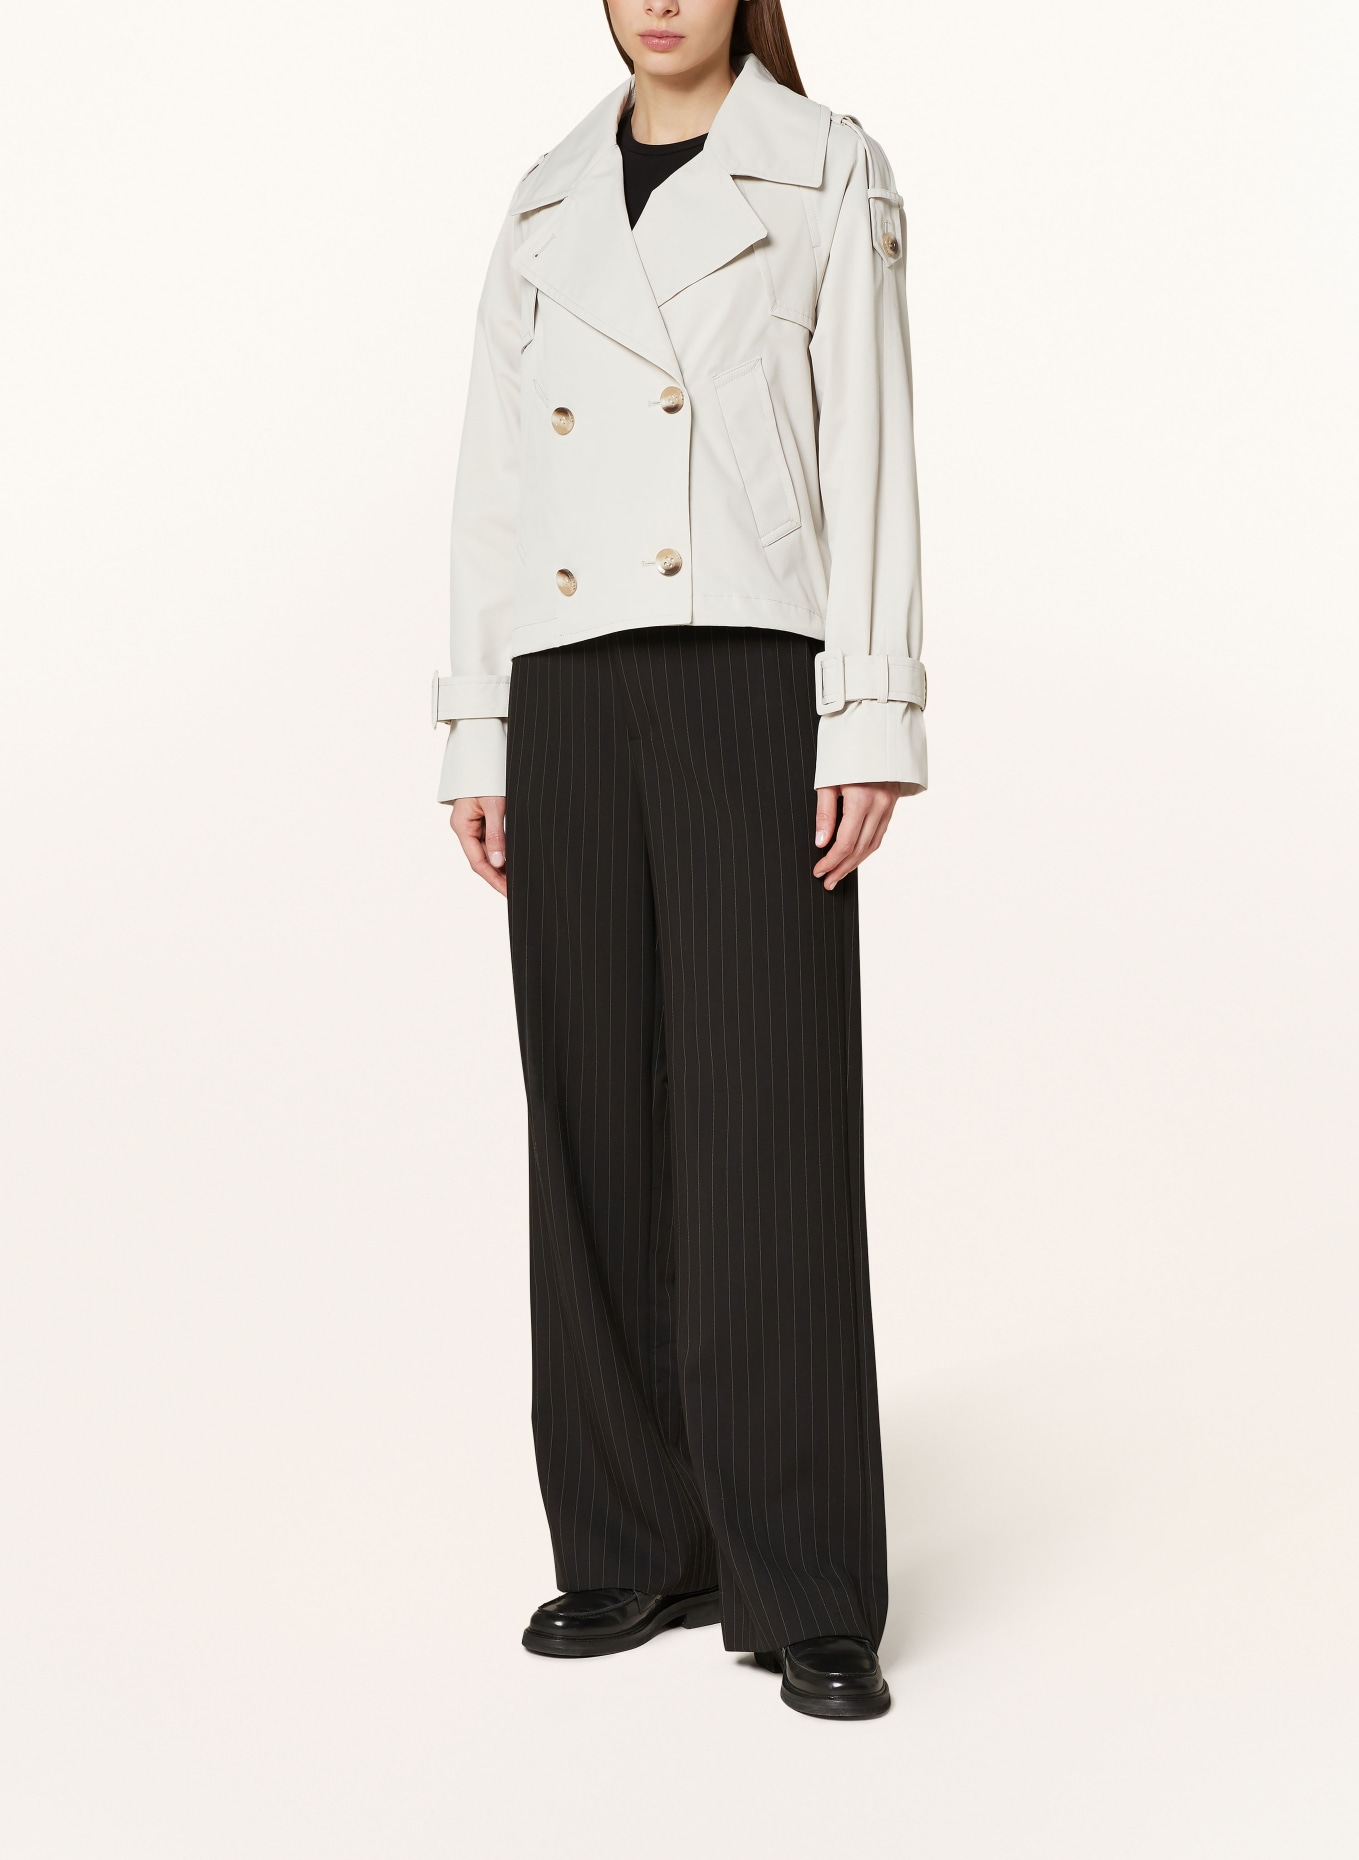 BEAUMONT Trench coat FAY, Color: CREAM (Image 2)